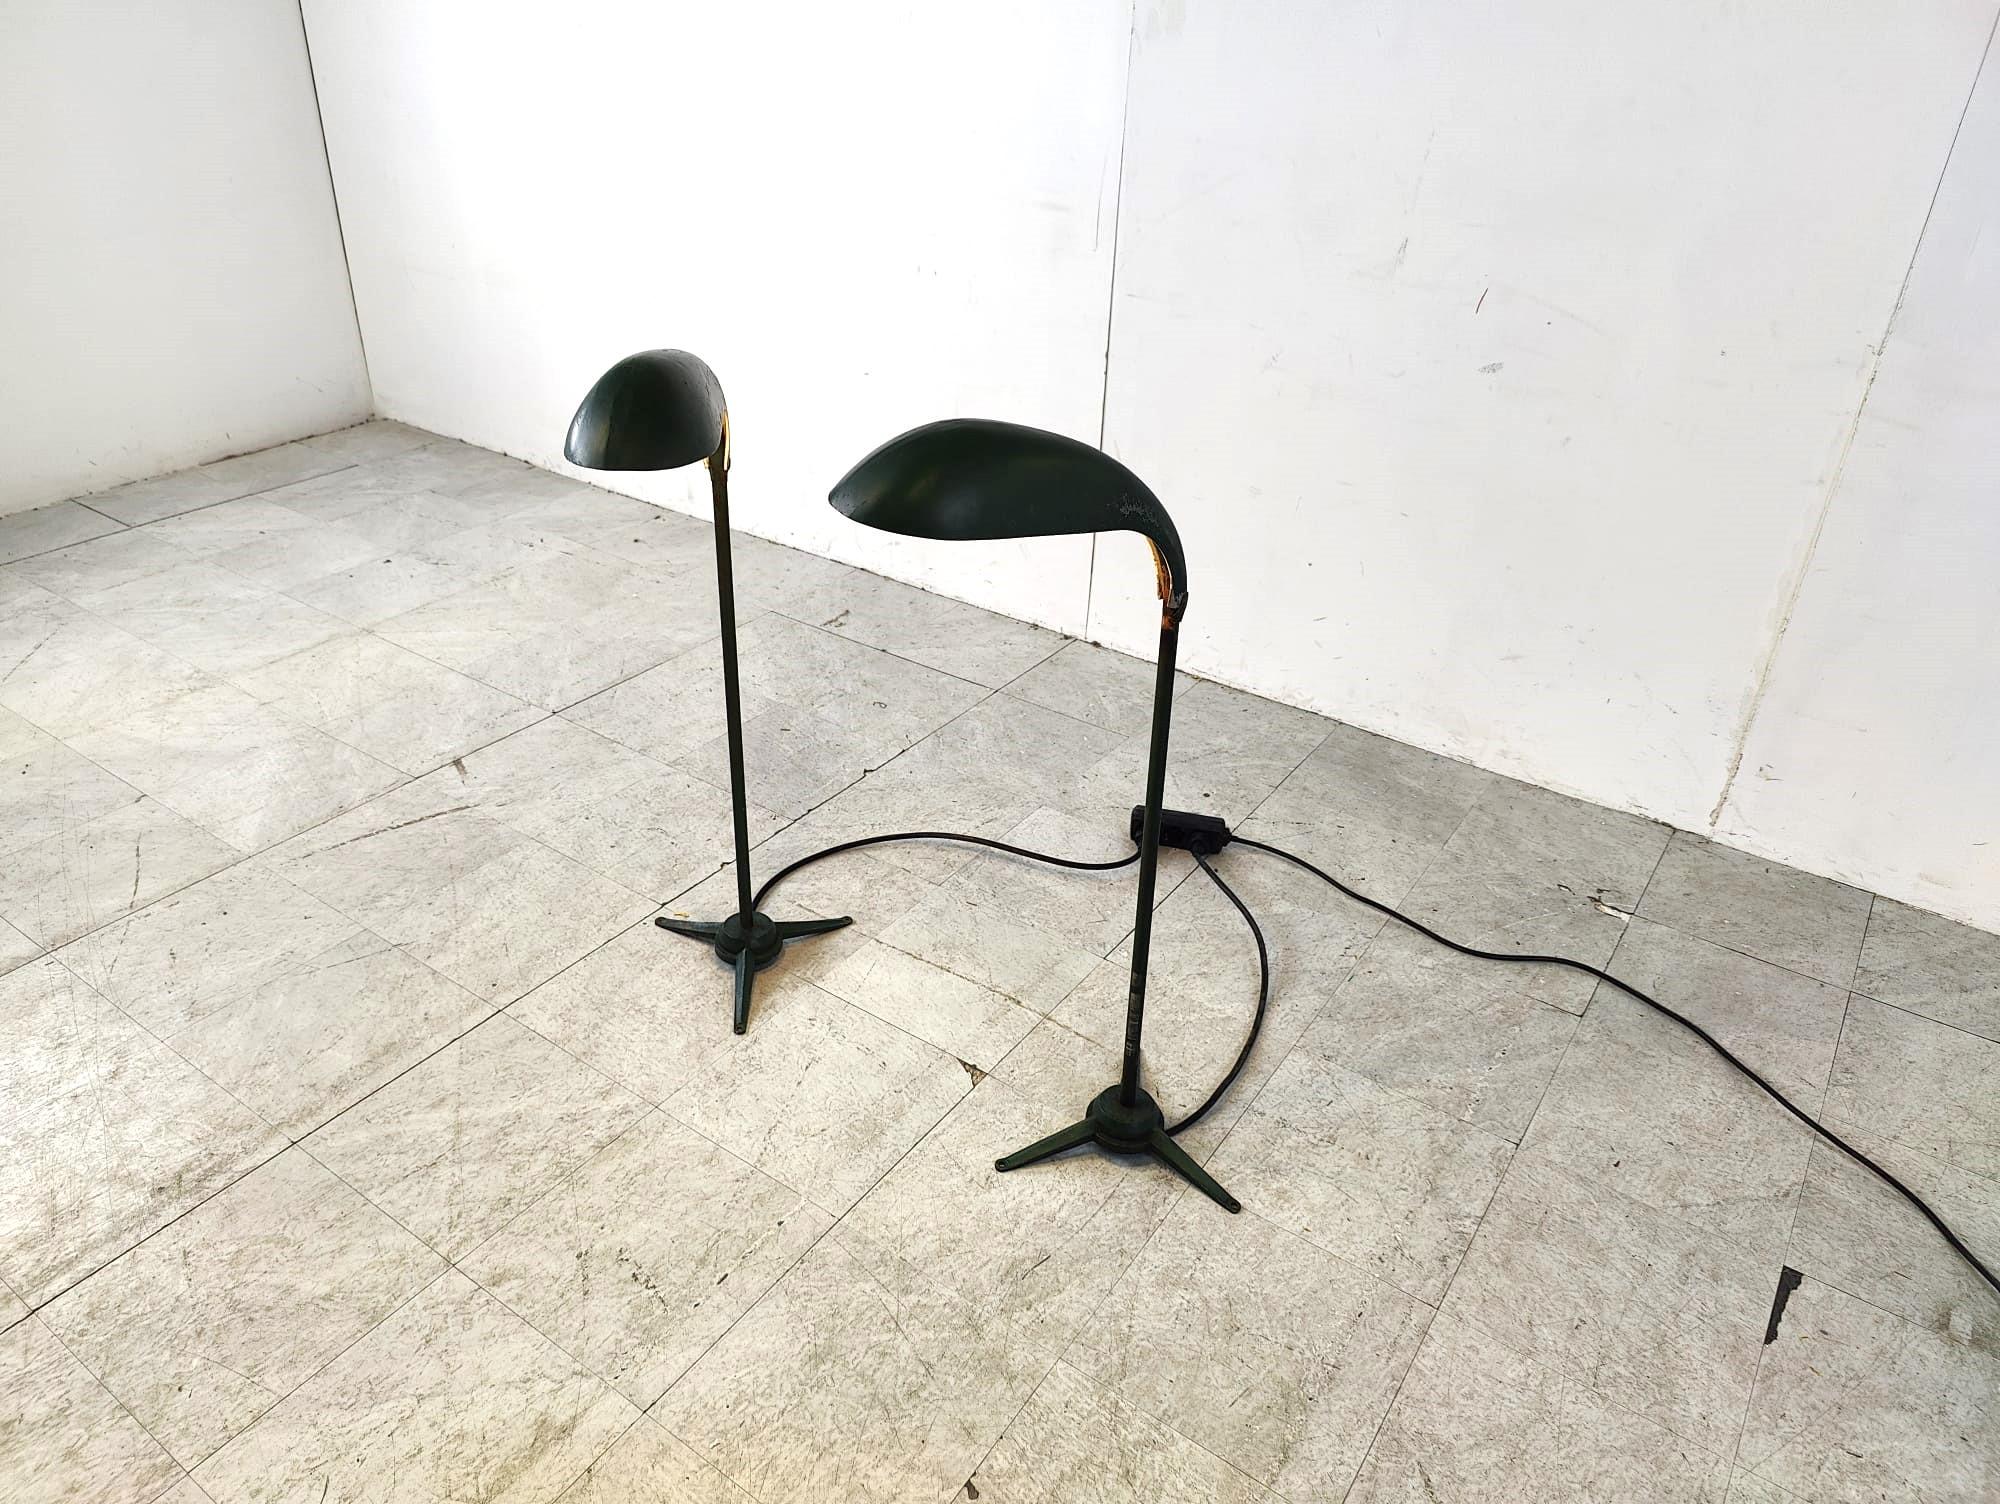 Pair of vintage floor lamps made from dark green metal.

They have nicely s haped shades and a tripod base.

They can be used in and outdoor.

Beautiful patina.

Tested and ready to use.

1970s - Belgium

Dimensions:
Height: 95cm
Width: 45cm
Depth: